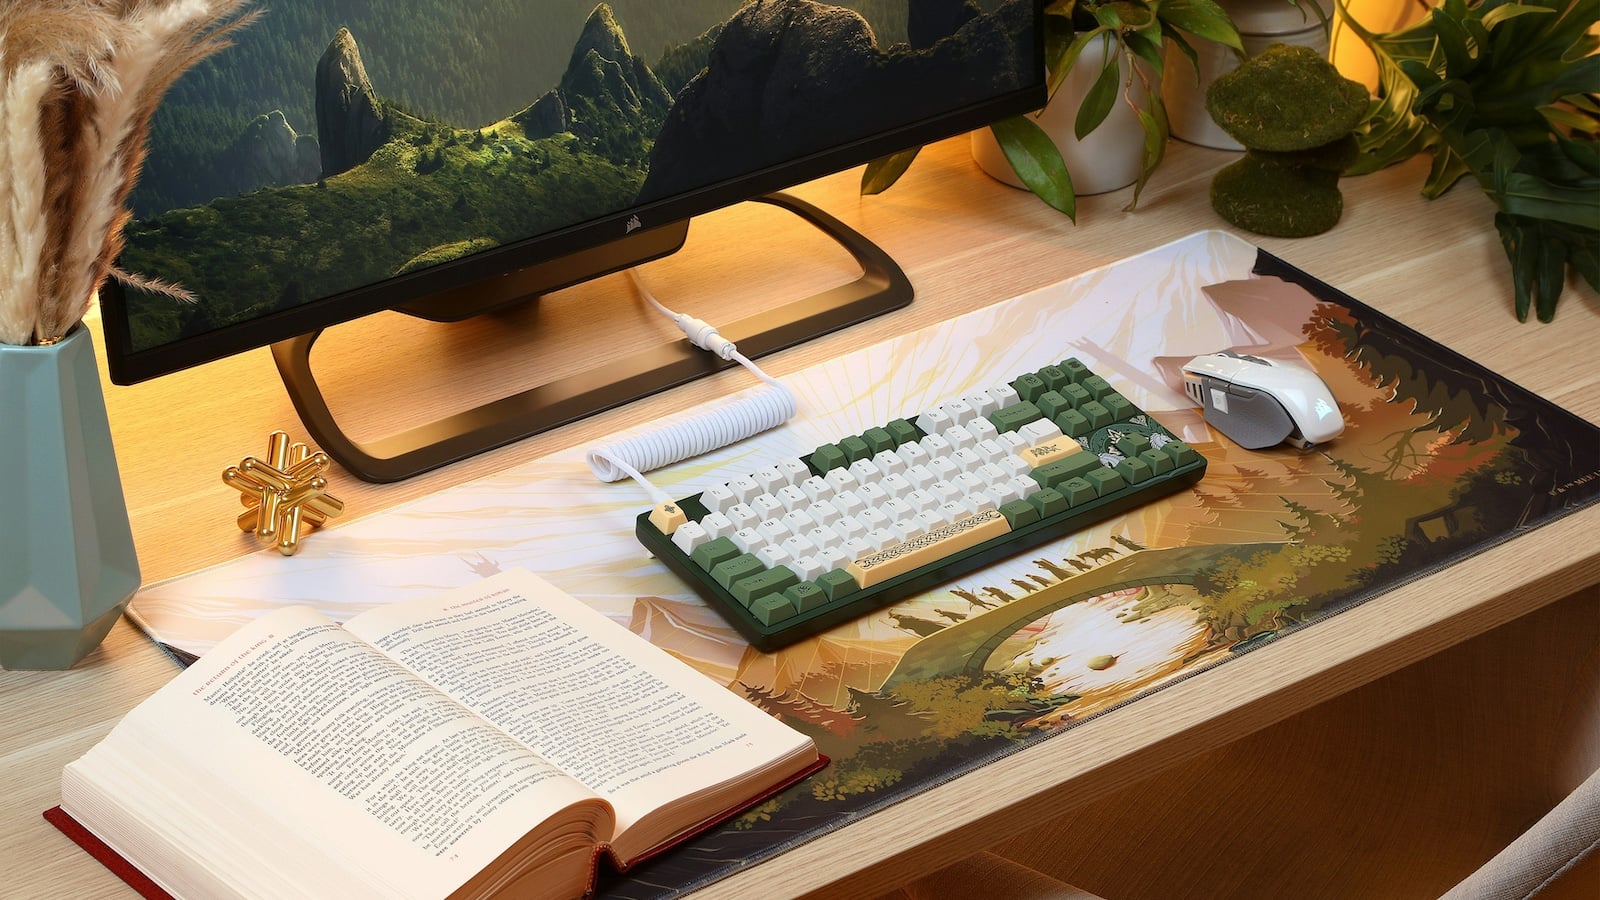 Drop + Lord of the Rings Rohan Keyboard is inspired by the kingdom of horsemasters